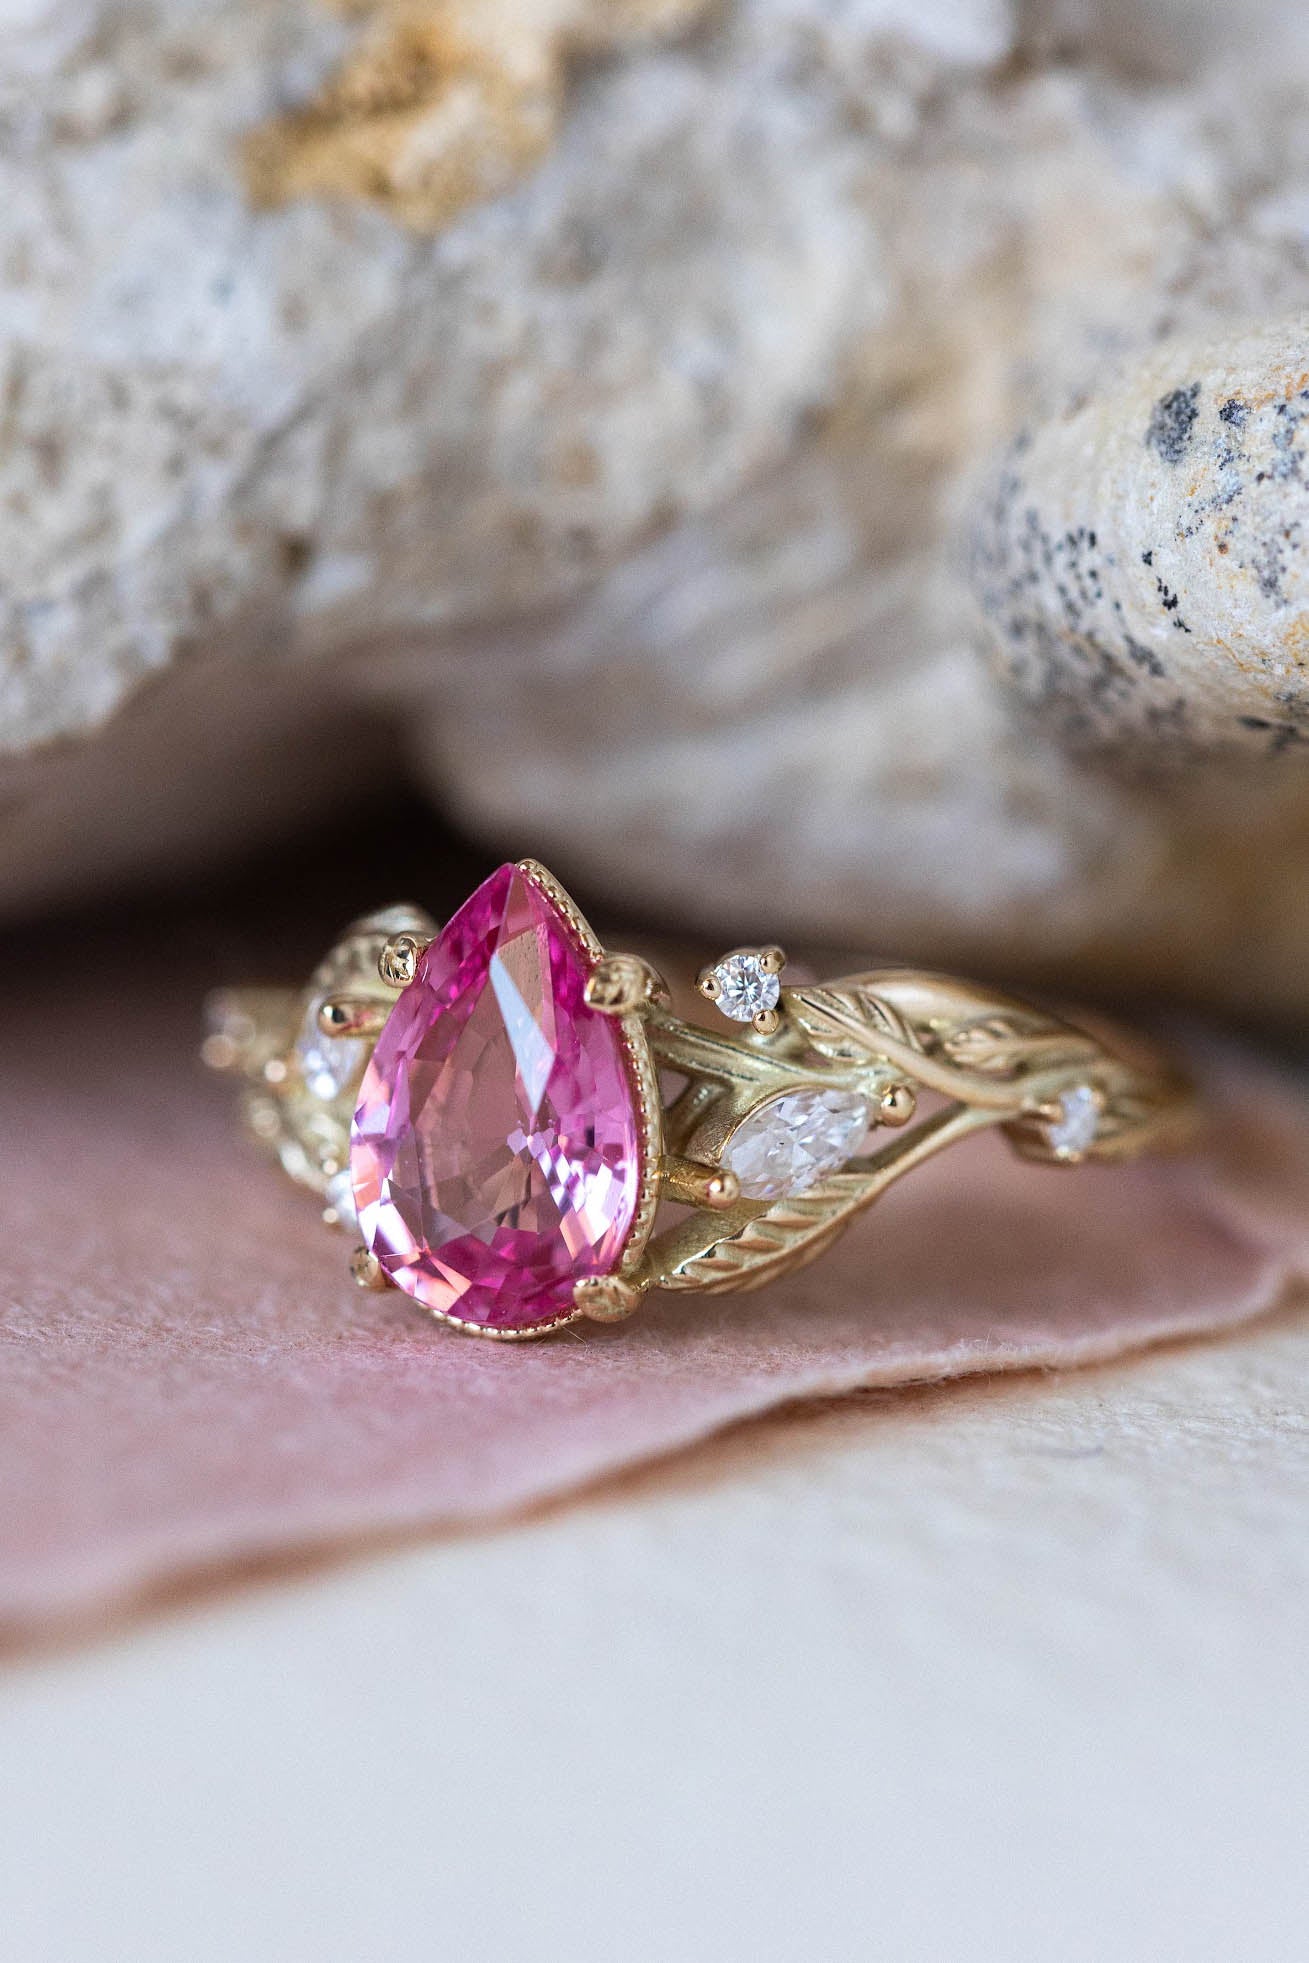 Natural pink spinel engagement ring, gold nature inspired engagement ring with leaves and diamonds / Patricia - Eden Garden Jewelry™